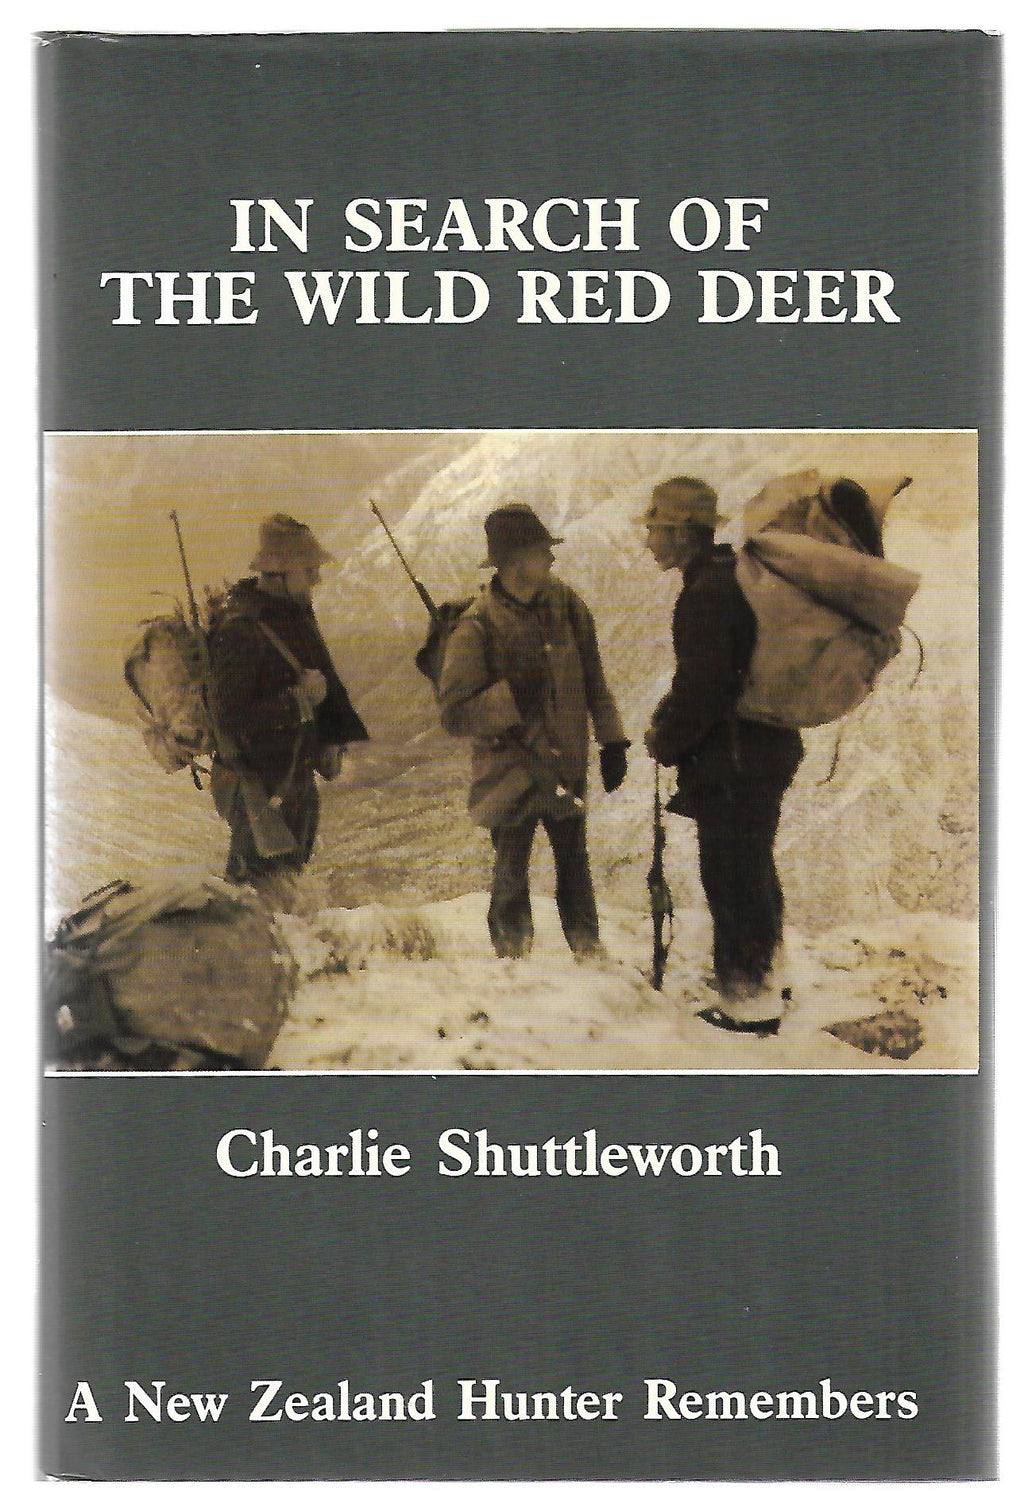 In Search of the Wild Red Deer - by Charlie Shuttleworth. [First Edition]